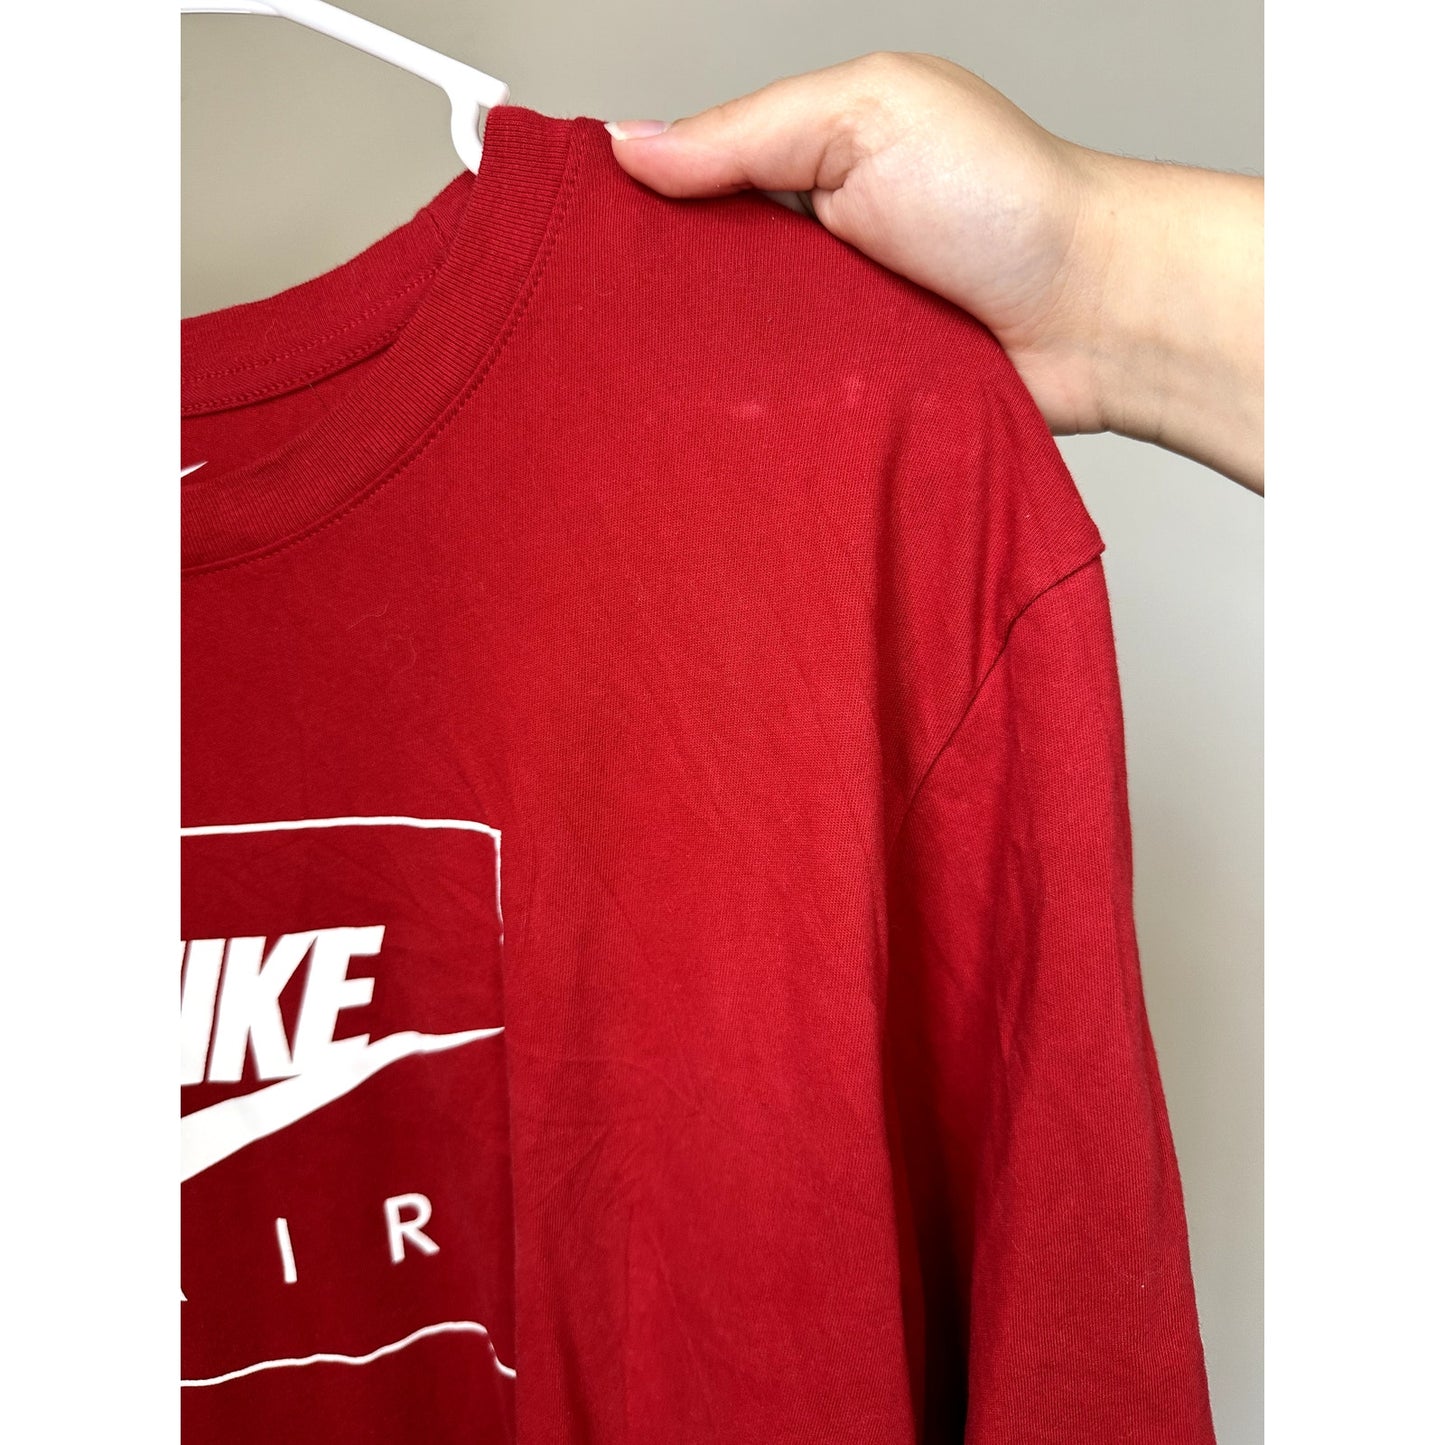 Nike Red Graphic T-shirt, Size L